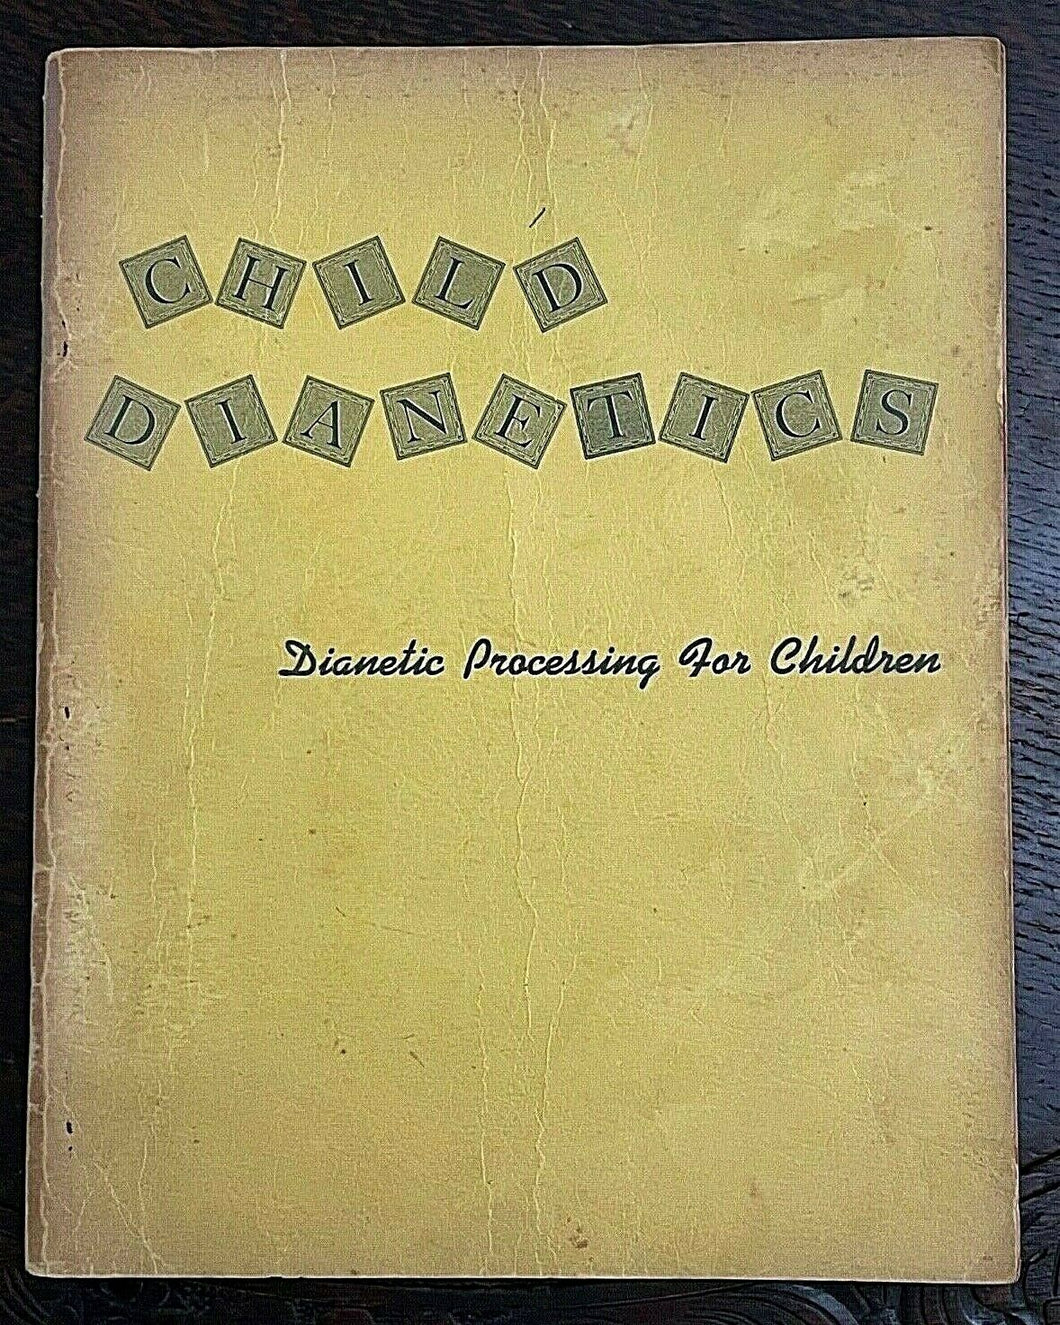 CHILD DIANETICS: DIANETIC PROCESSING FOR CHILDREN - L. Ron Hubbard, 1st Ed, 1951